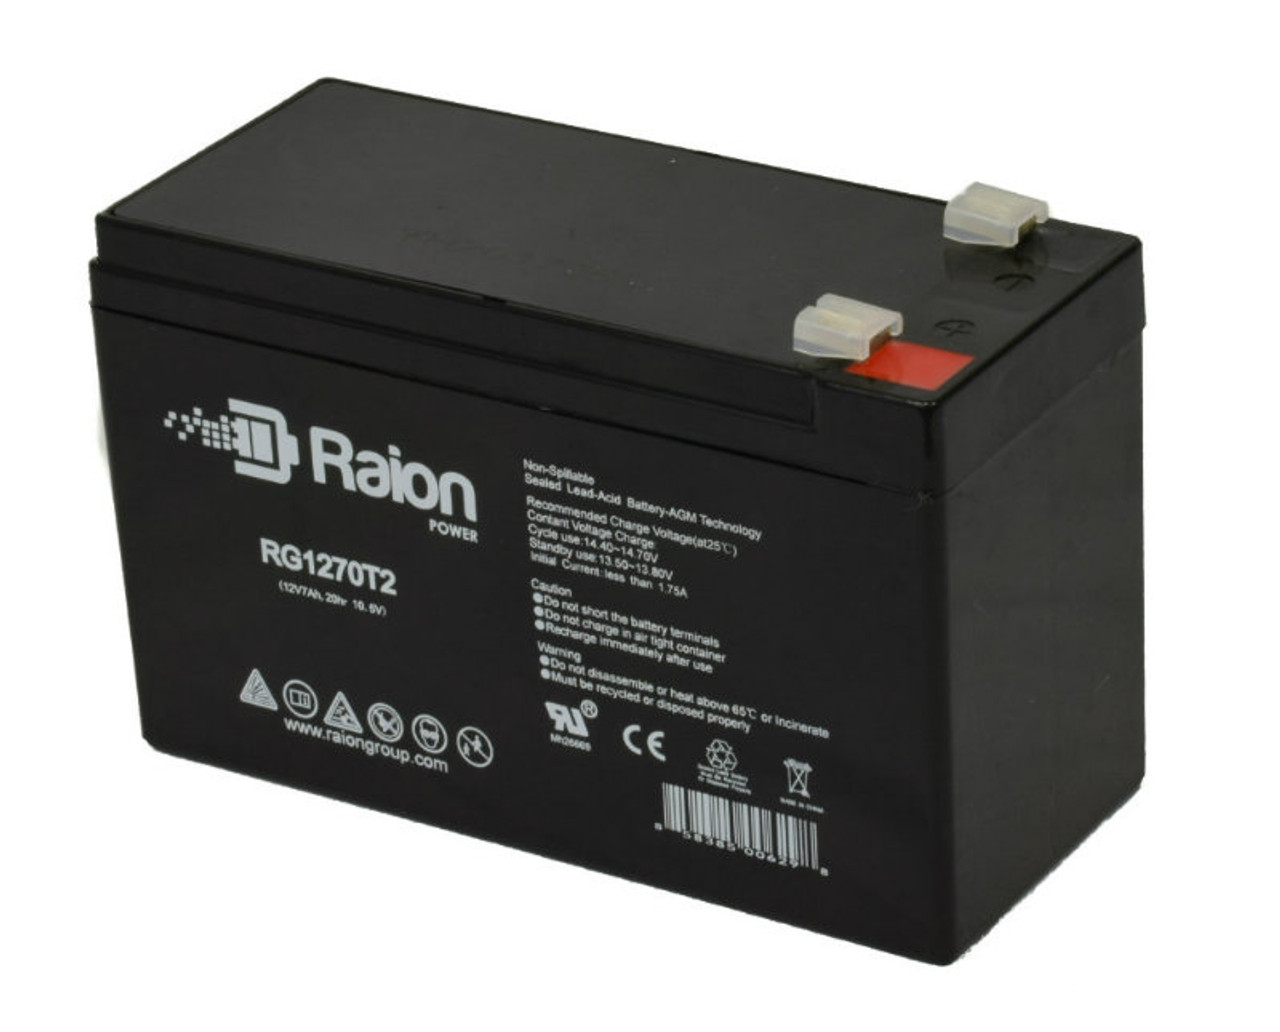 Raion Power Replacement 12V 7Ah Battery for Sunforce Spotlight 77709 12 Million Candle Power - 1 Pack